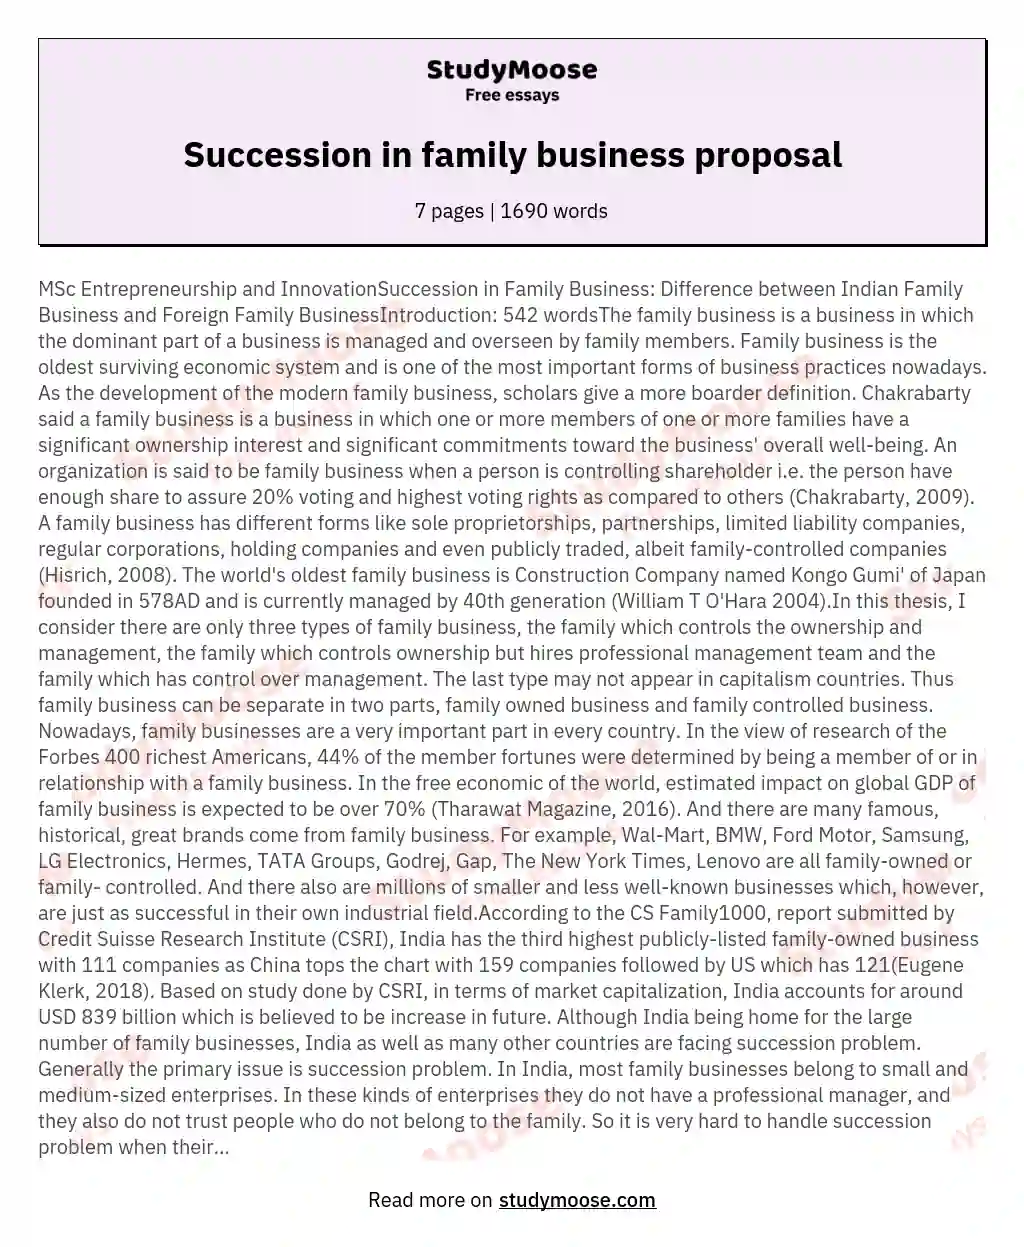 Succession in family business proposal